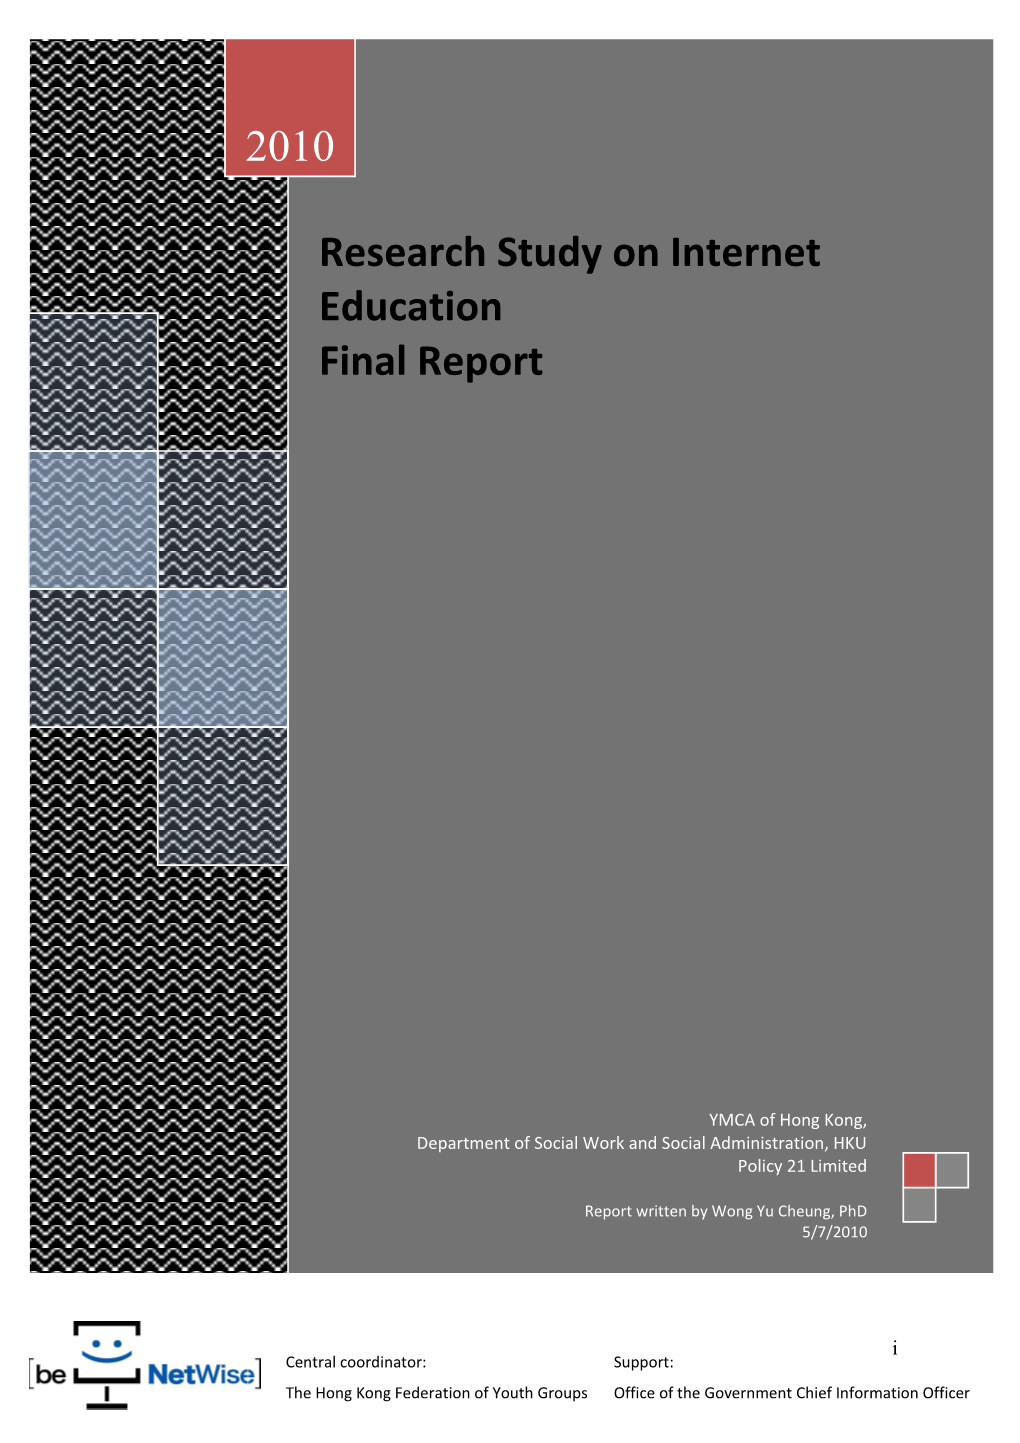 Research Study on Internet Education